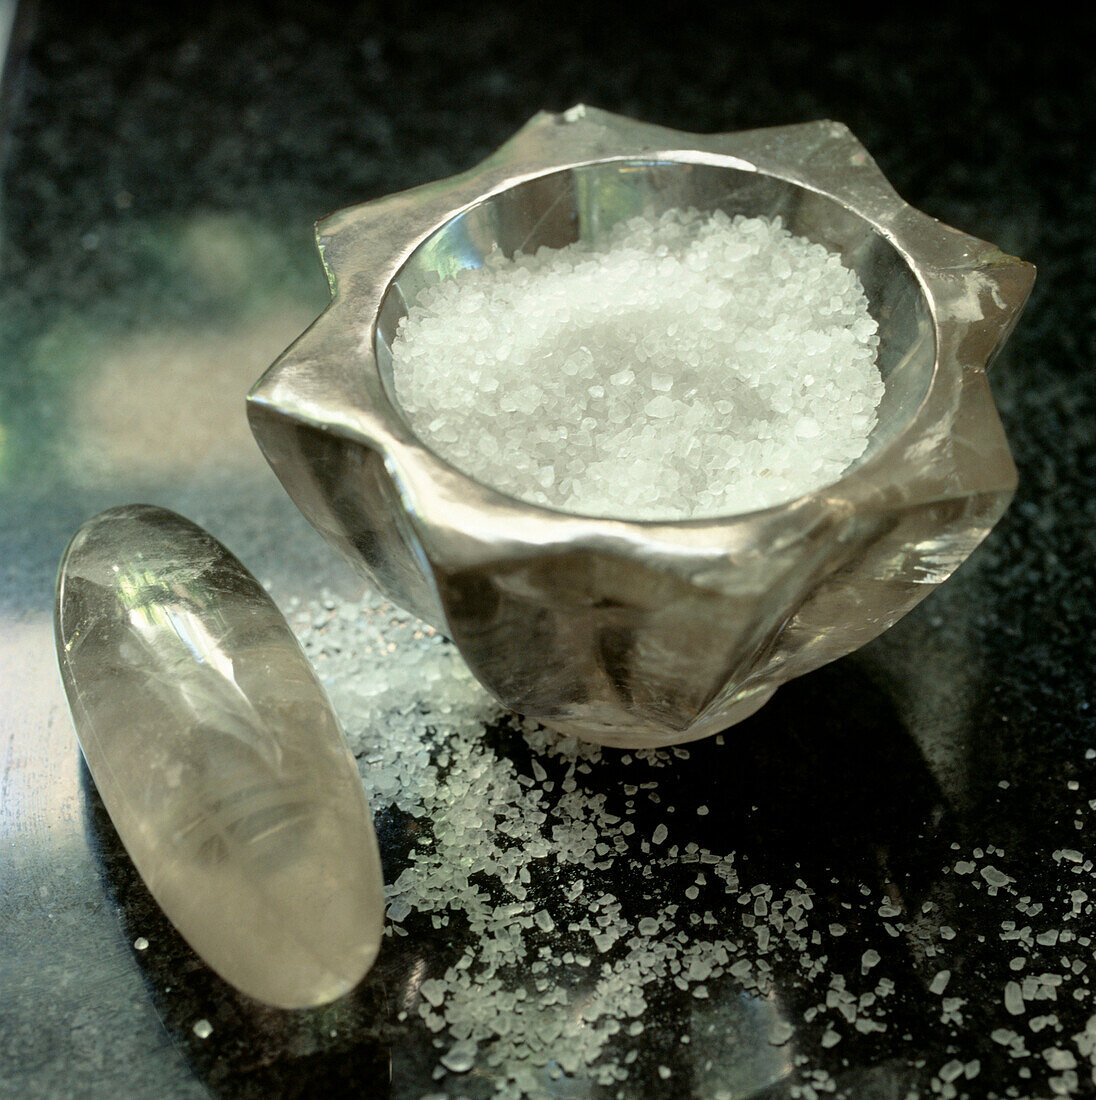 Sea salt in a glass pestle and mortar